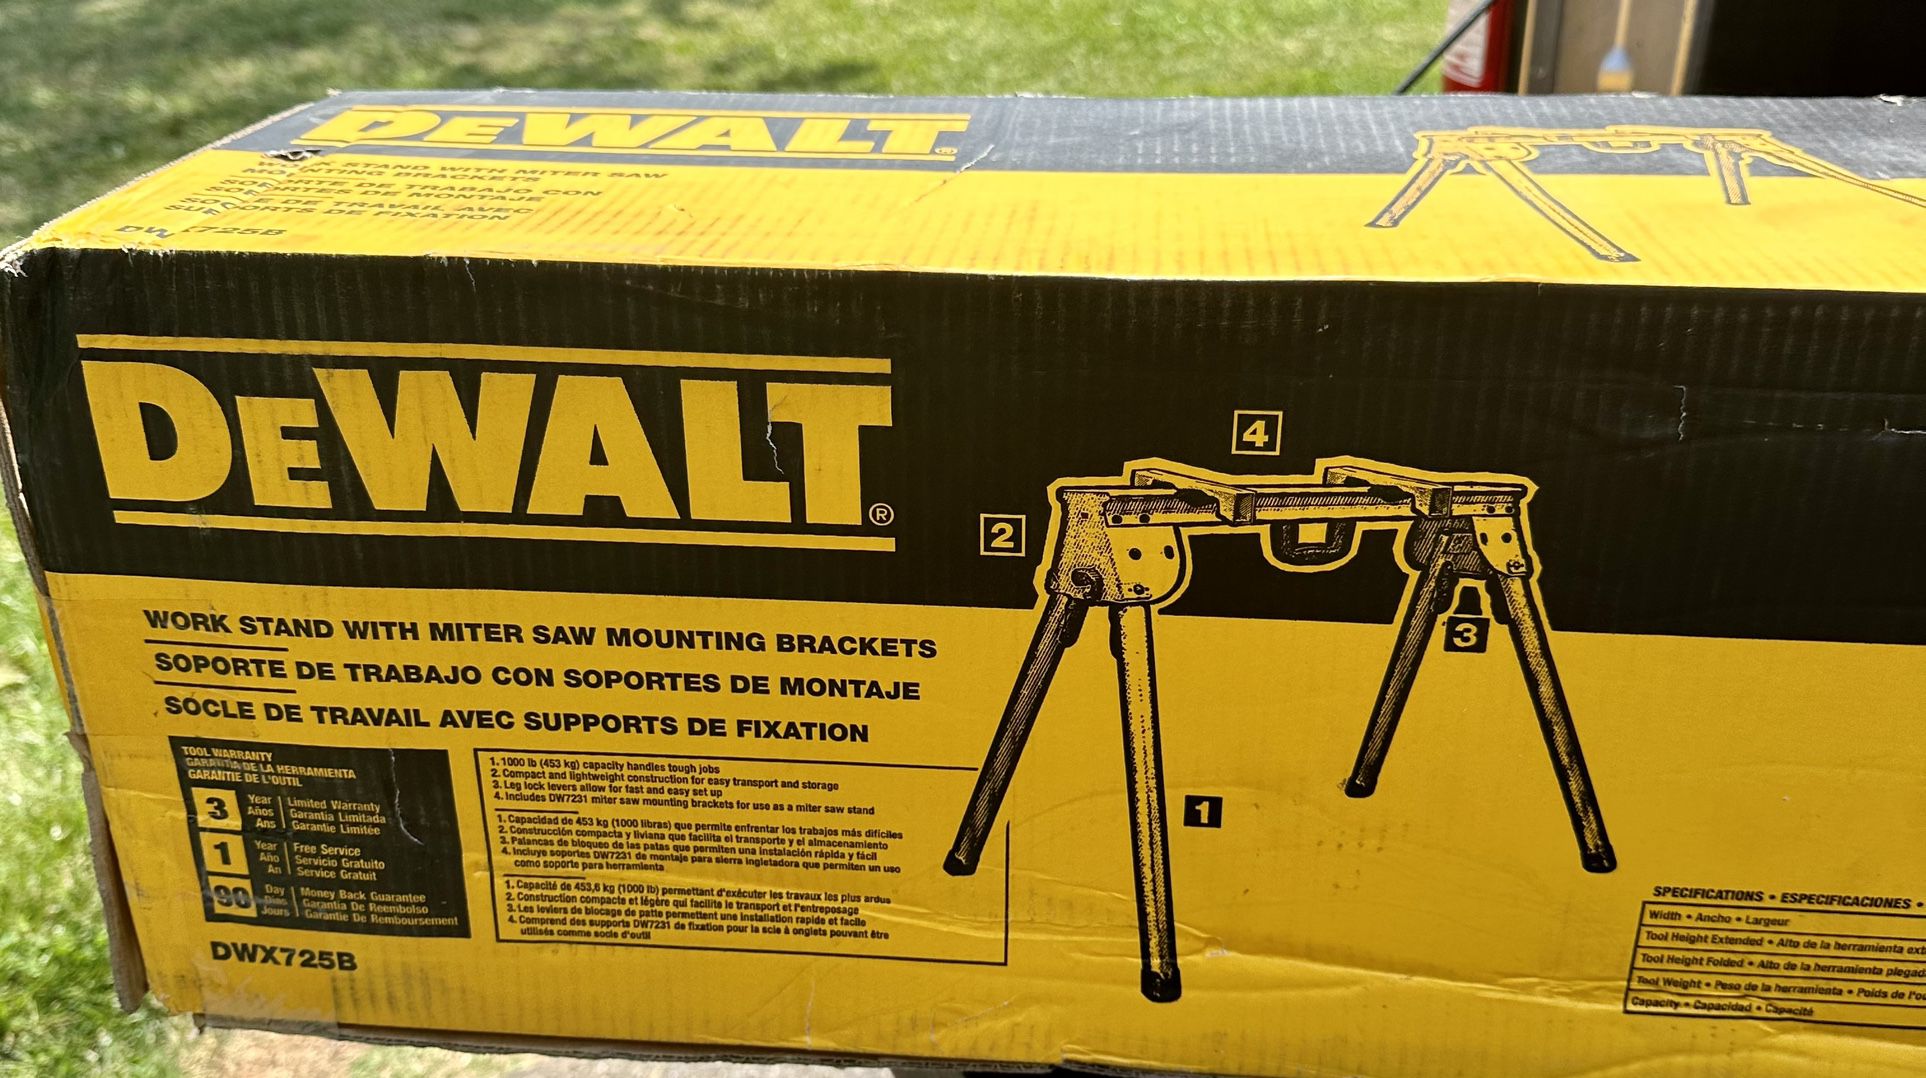 Dewalt Aluminum Miter saw stand-New In box for Sale in Nottingham, MD  OfferUp